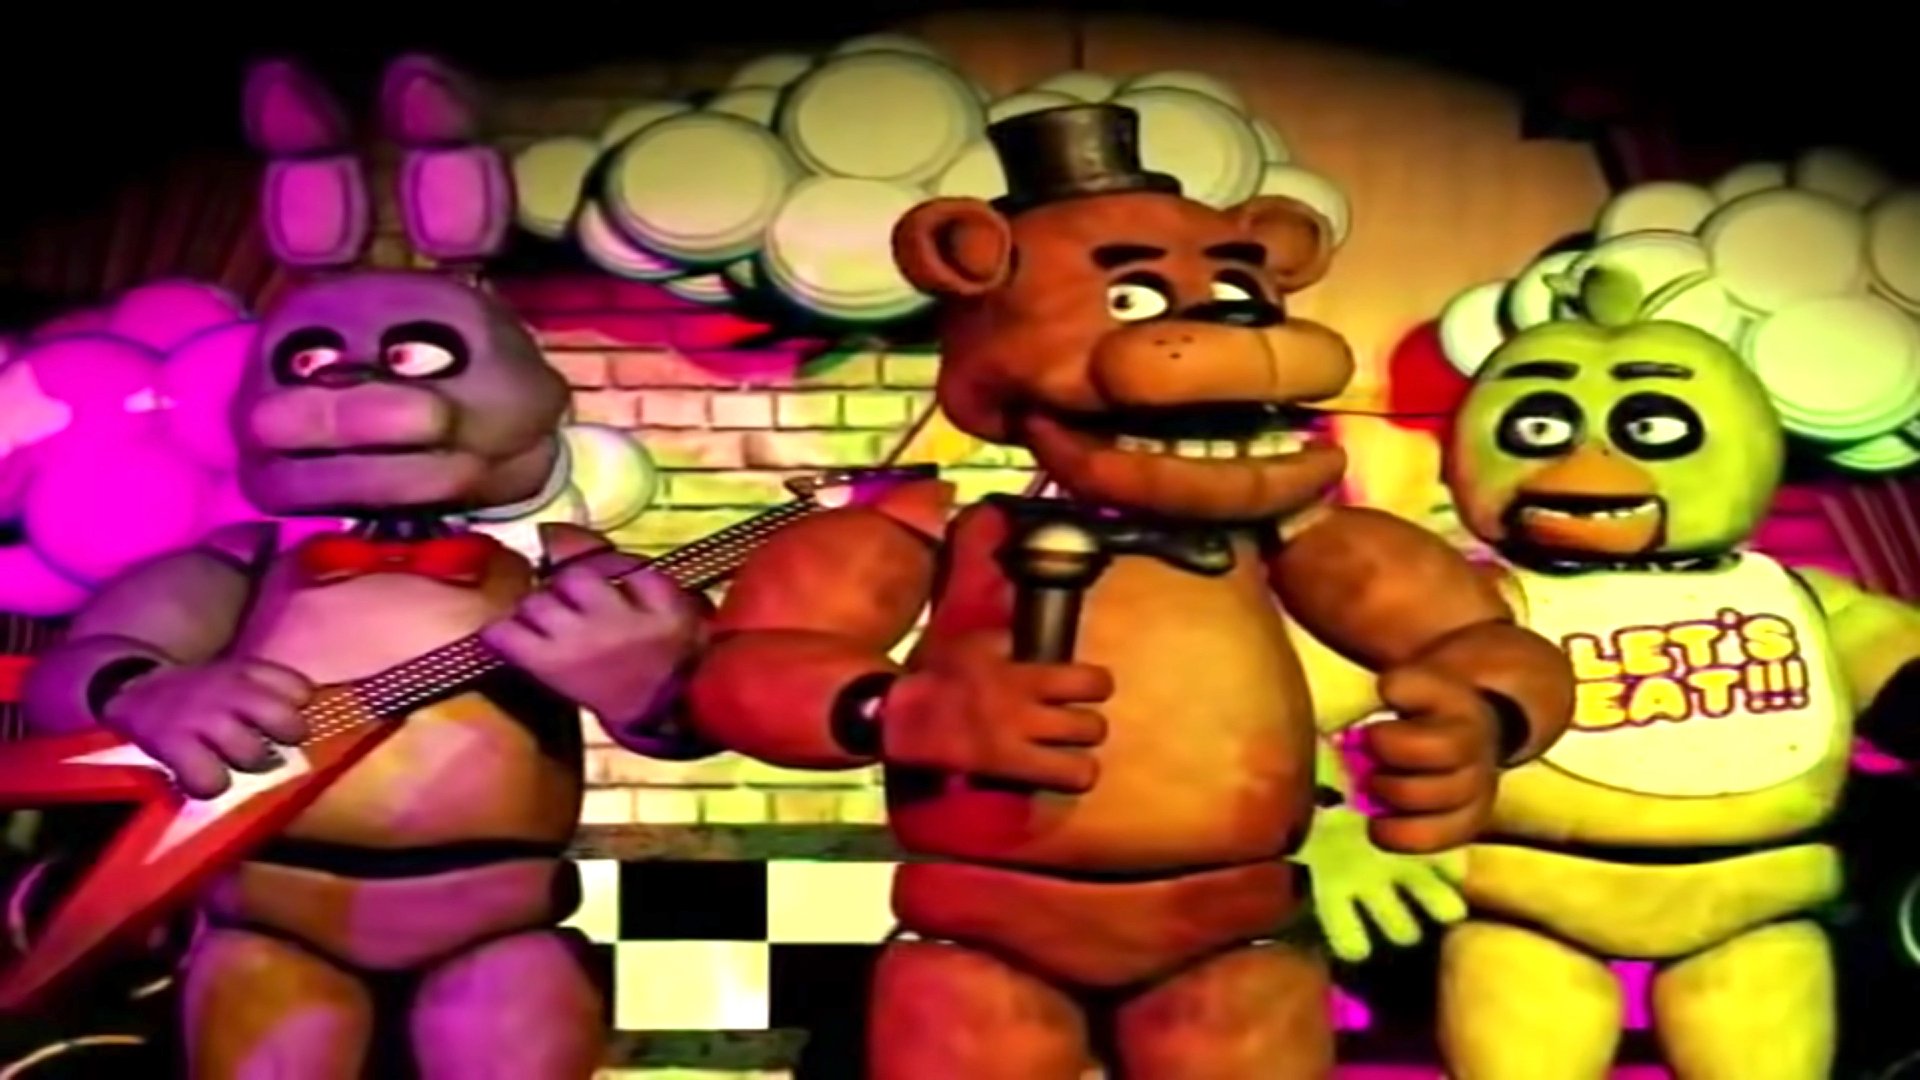 Five Nights at Freddy's' Movie - Everything We Know